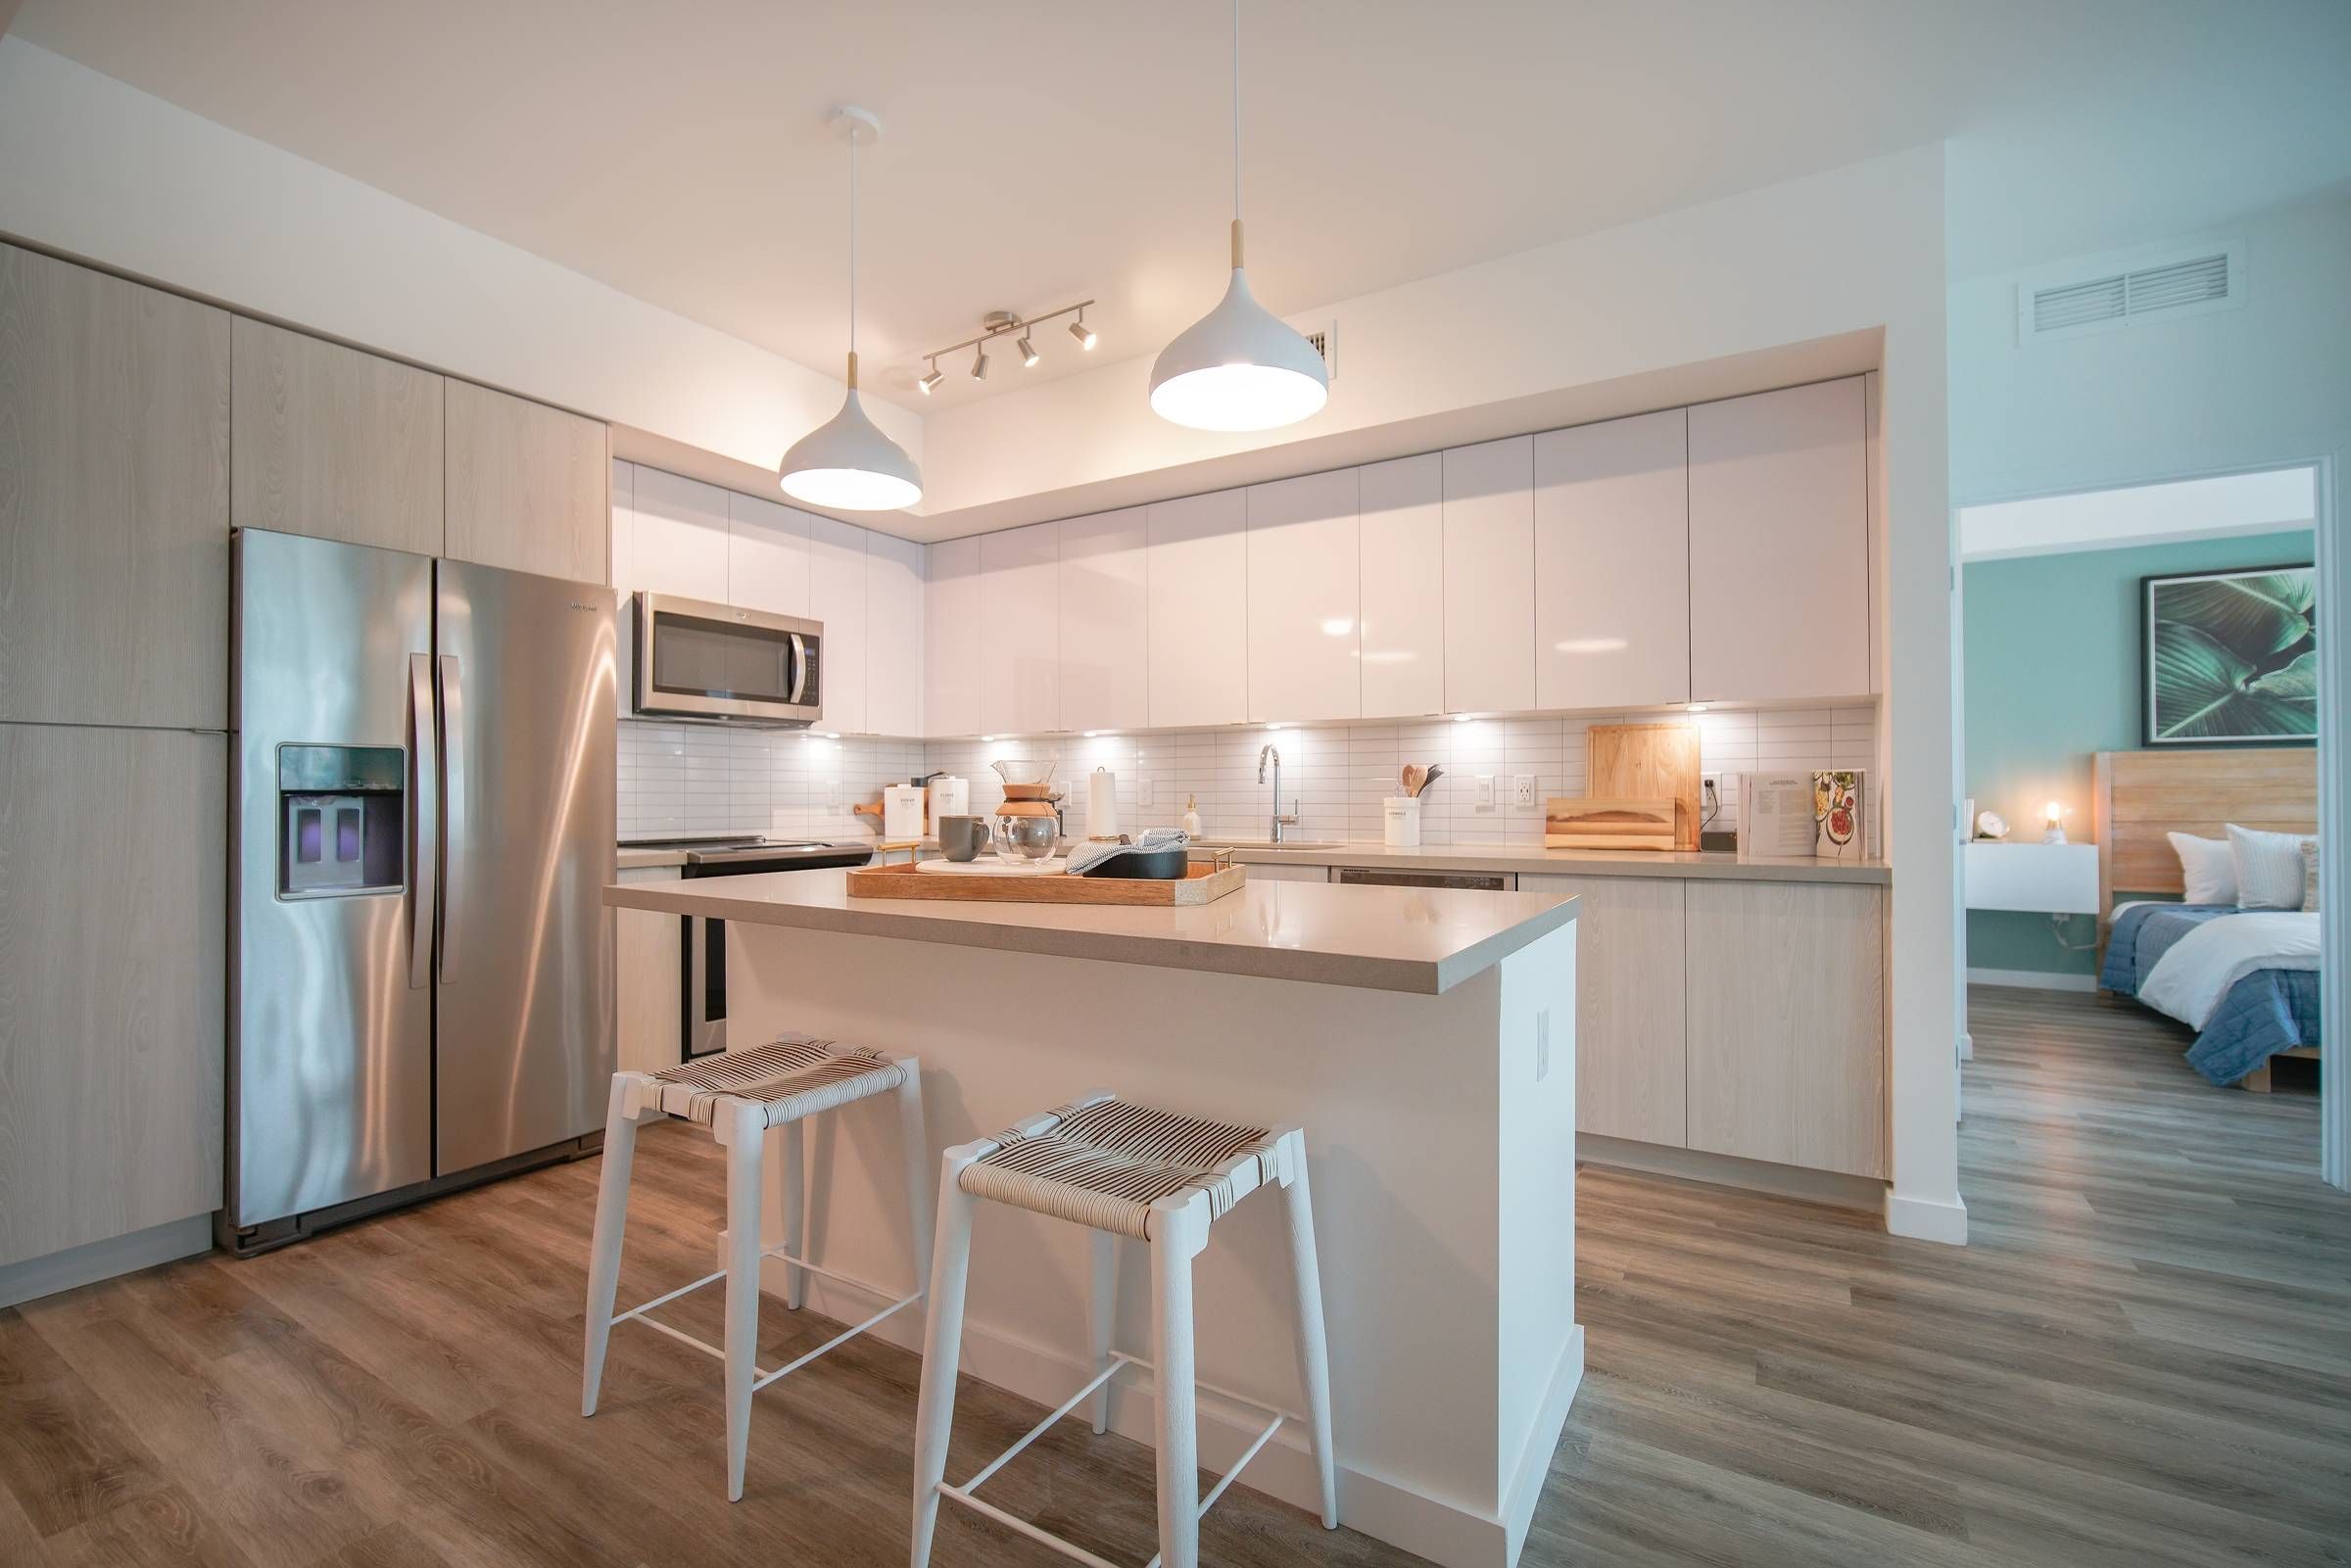 Bask resident kitchen with ample cabinet space, floating kitchen island with seating, and stainless steel appliances.